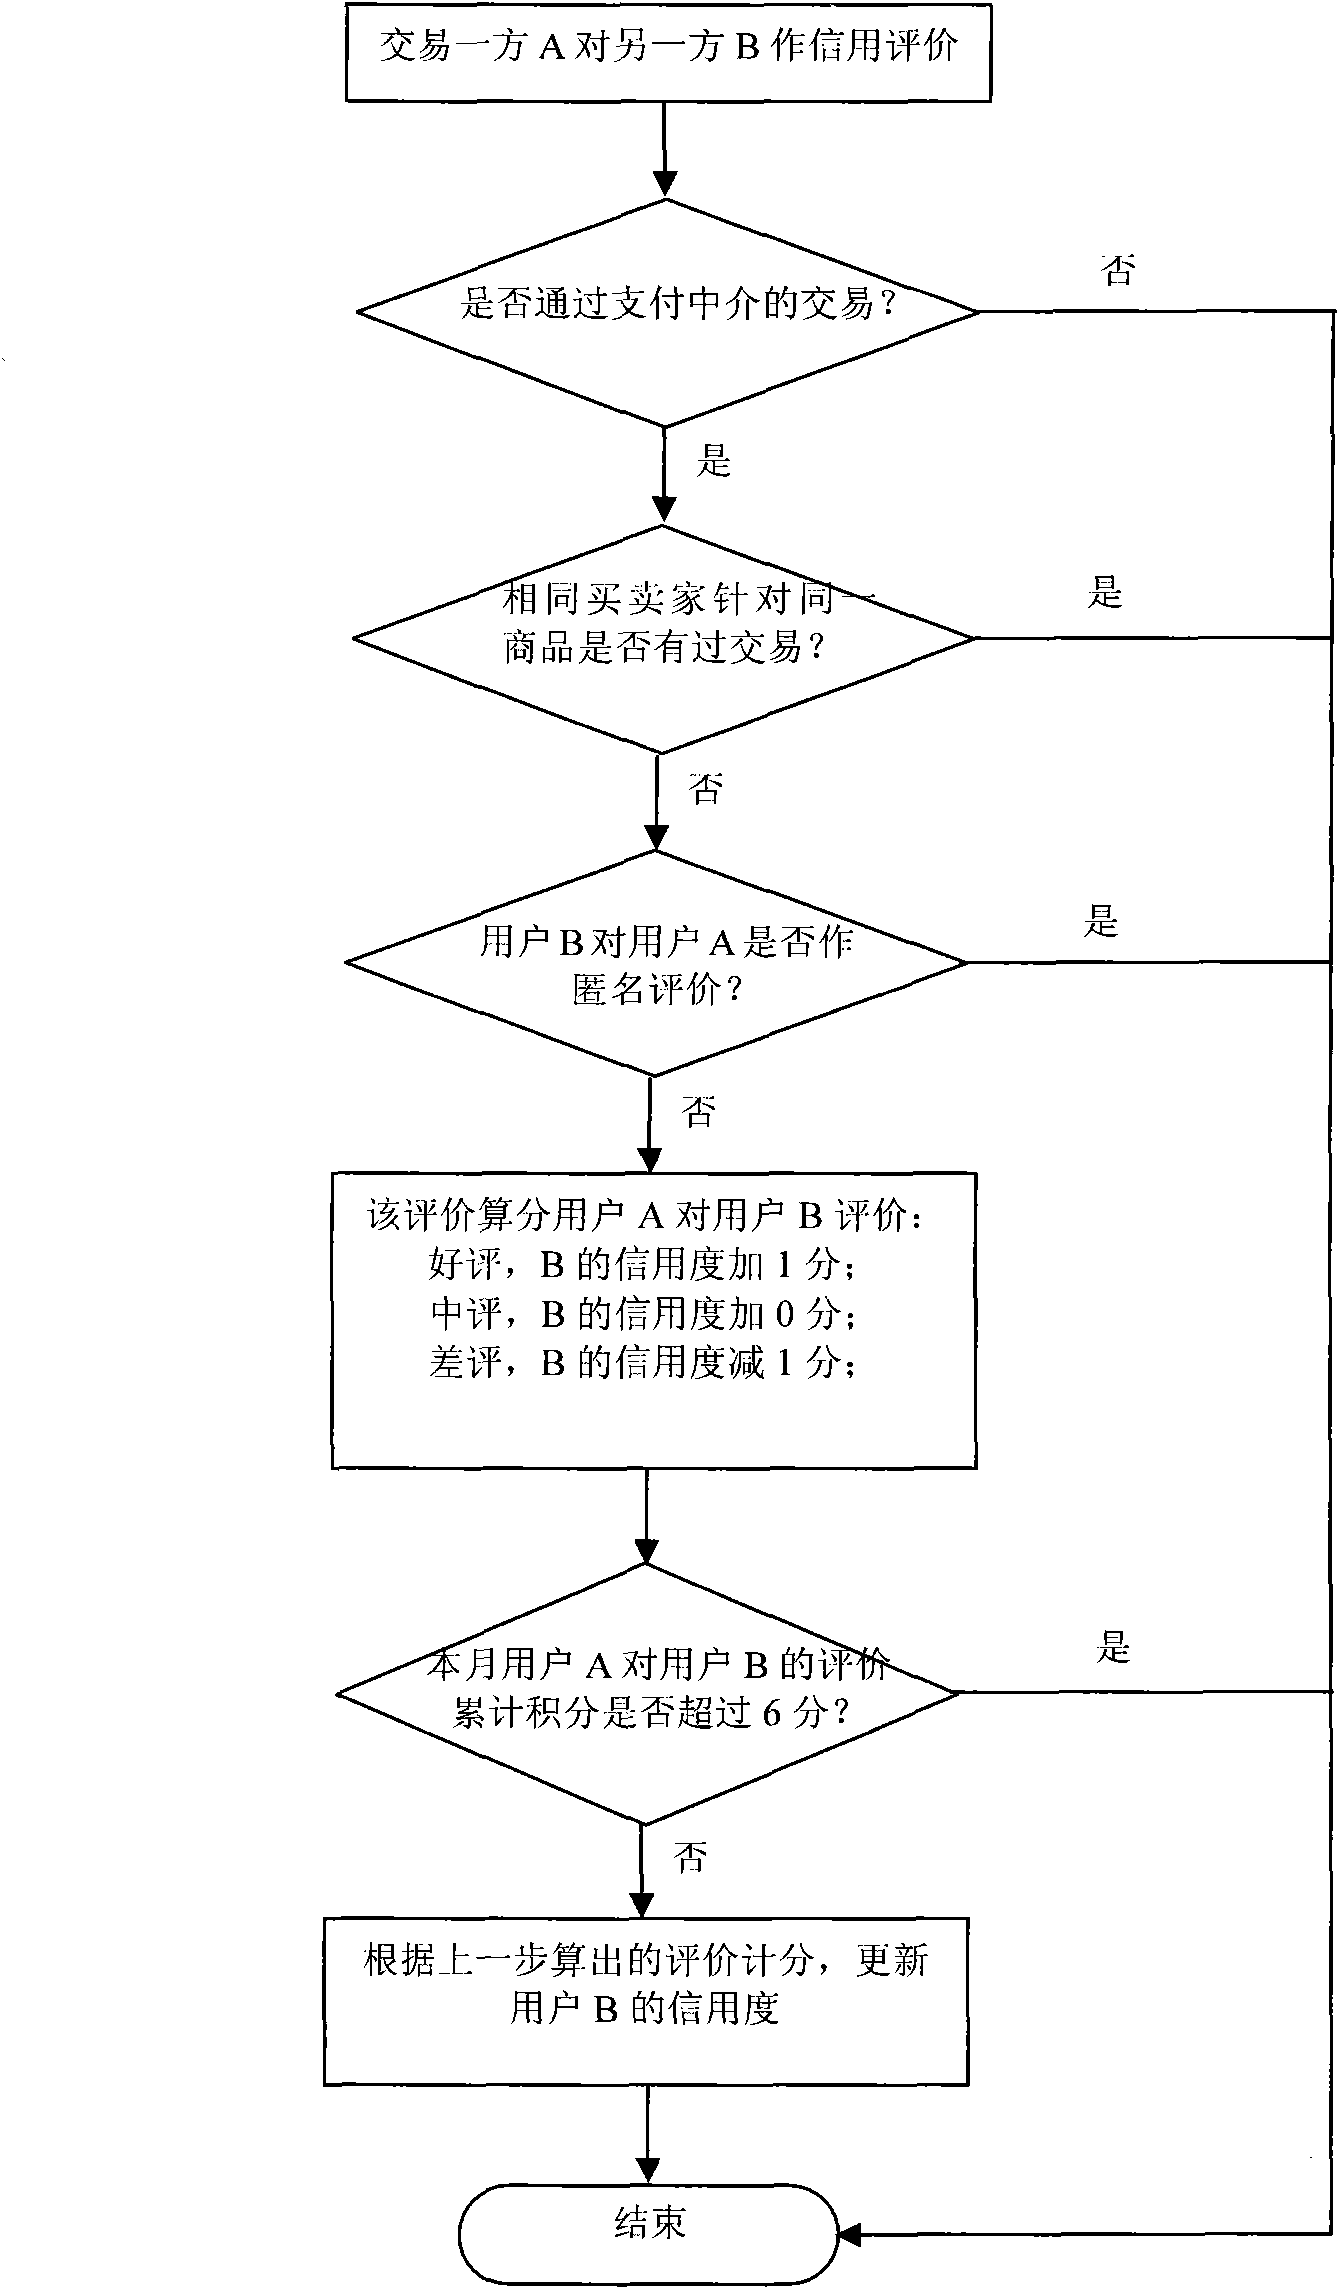 Method and device for evaluating client credit